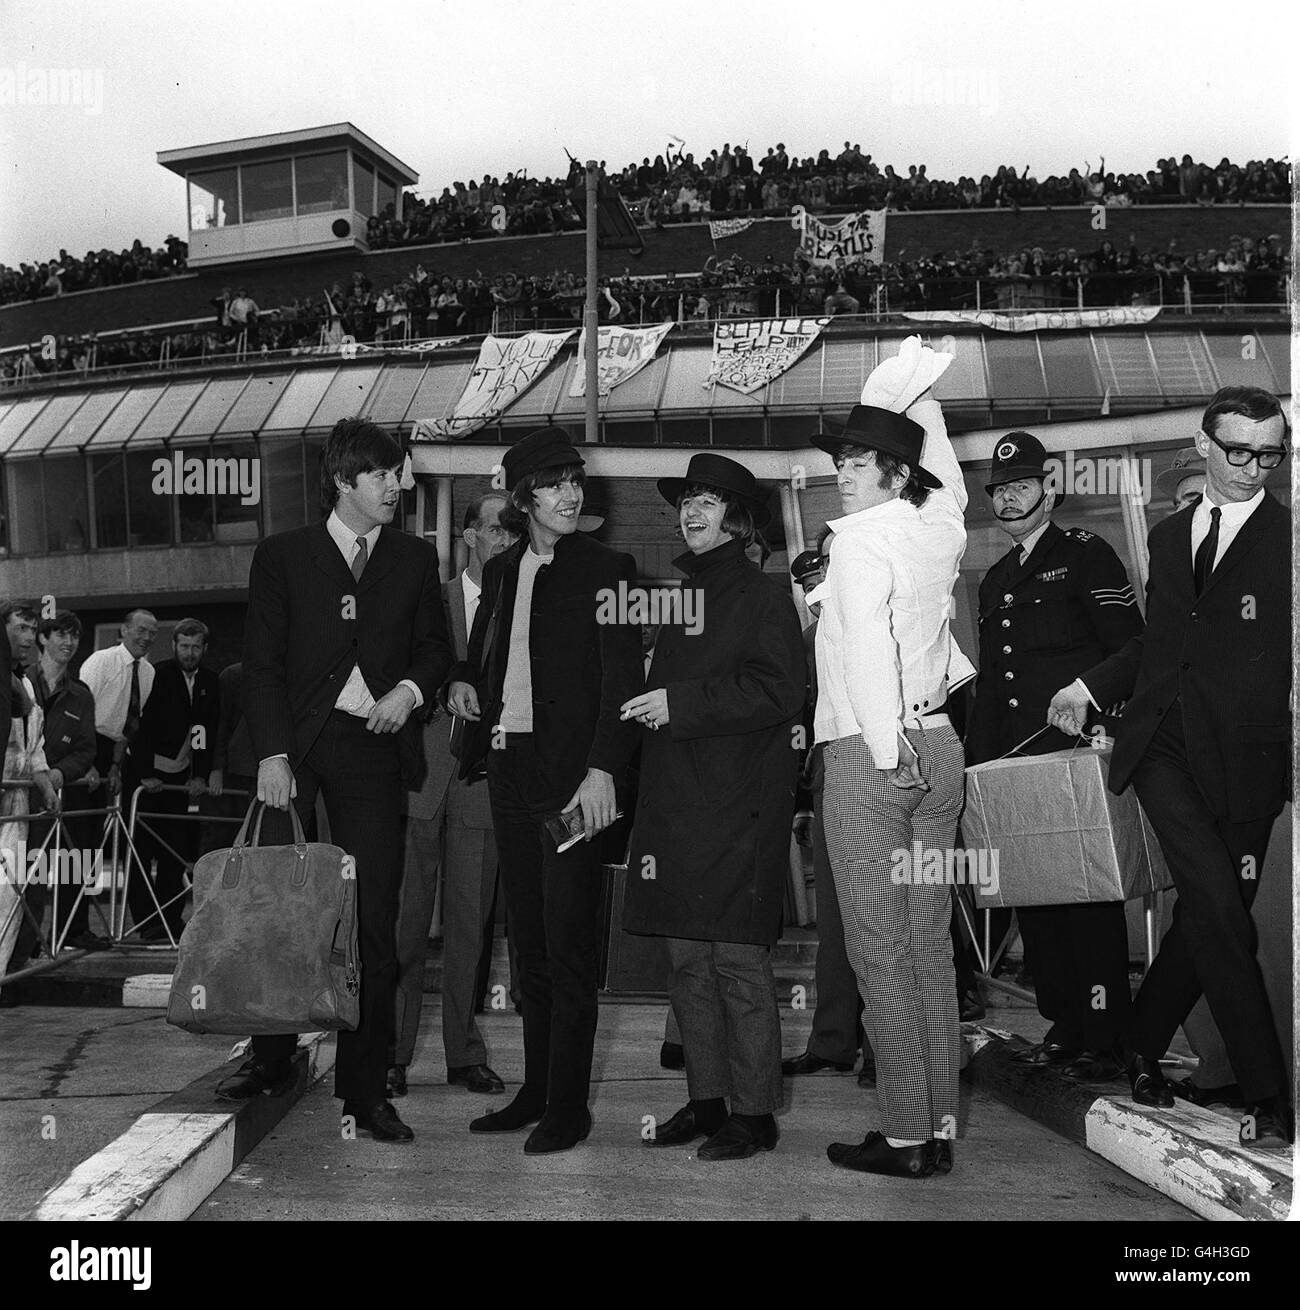 John Lennon, in a souvenir hat, strikes a spanish pose for the hundreds of fans giving a screaming welcome to The Beatles - Paul McCartney, George Harrison & Ringo Starr at London Airport on their return from Spain. 4/7/65 117349-1 ghgal Stock Photo